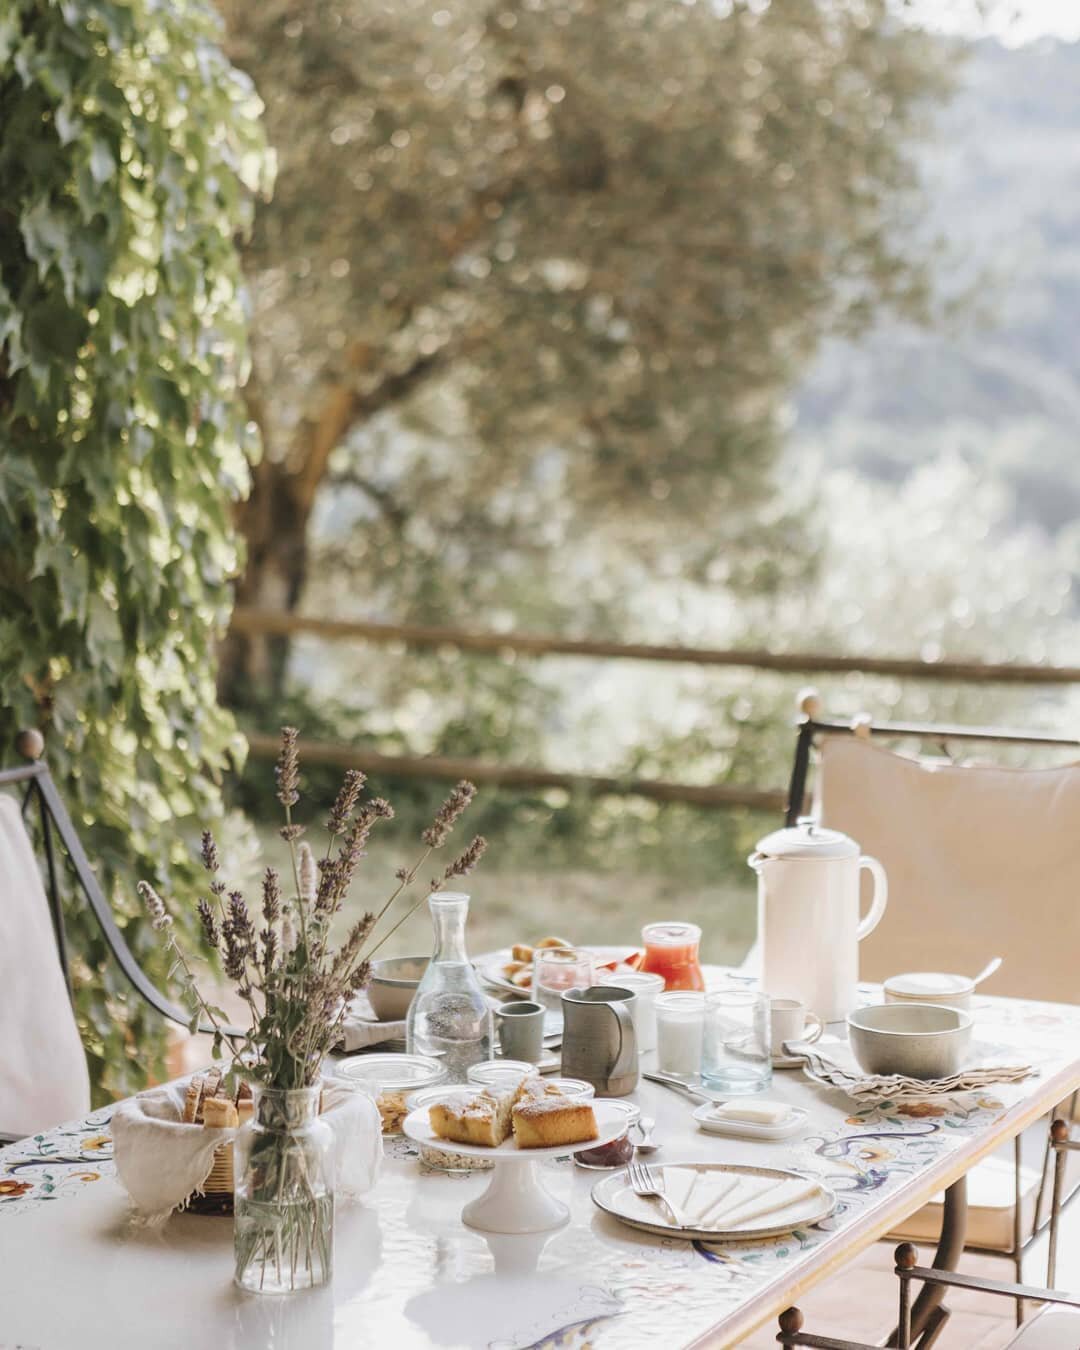 We woke up to good news this morning: from June 3 unrestricted travel from the EU to Italy will be possible again! And, also, the agriturismo is allowed to open its doors again in June.

We can't wait to welcome you!
.
.
📷 @atelierauthentic .
.
#agr